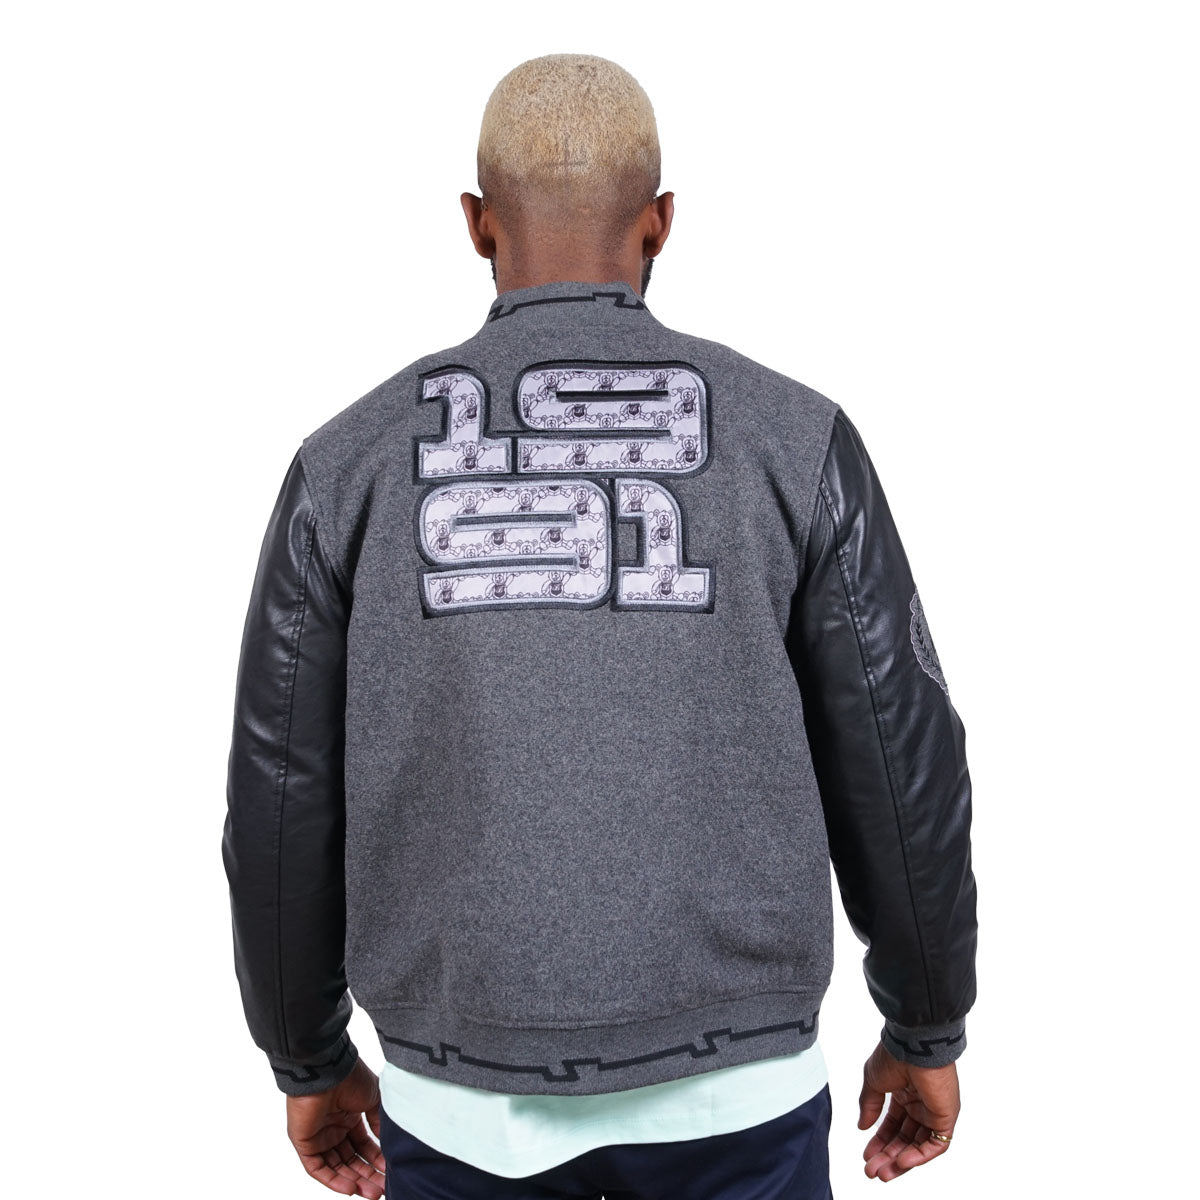 Back side of the Jacket, emblazoned with a fabric 1991 design. This jacket feels amazing to wear and looks great too. Grey body with black PU sleeves with a fabric inner lining.